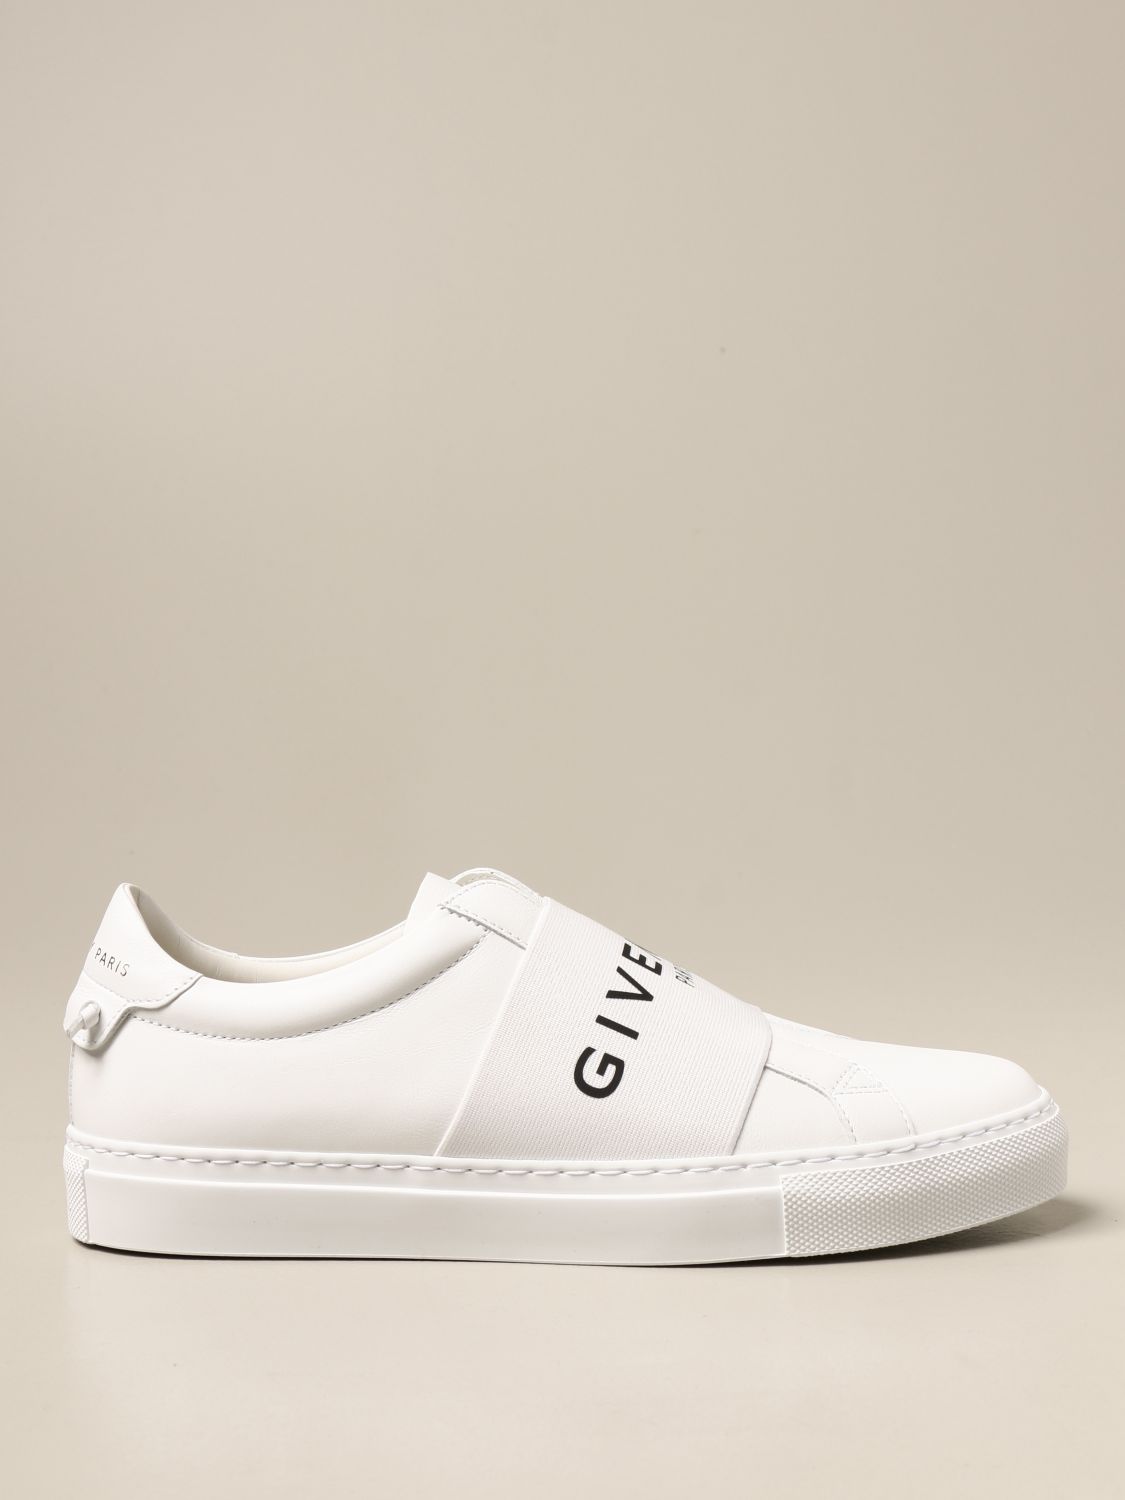 Givenchy sneakers in calfskin with logoed band